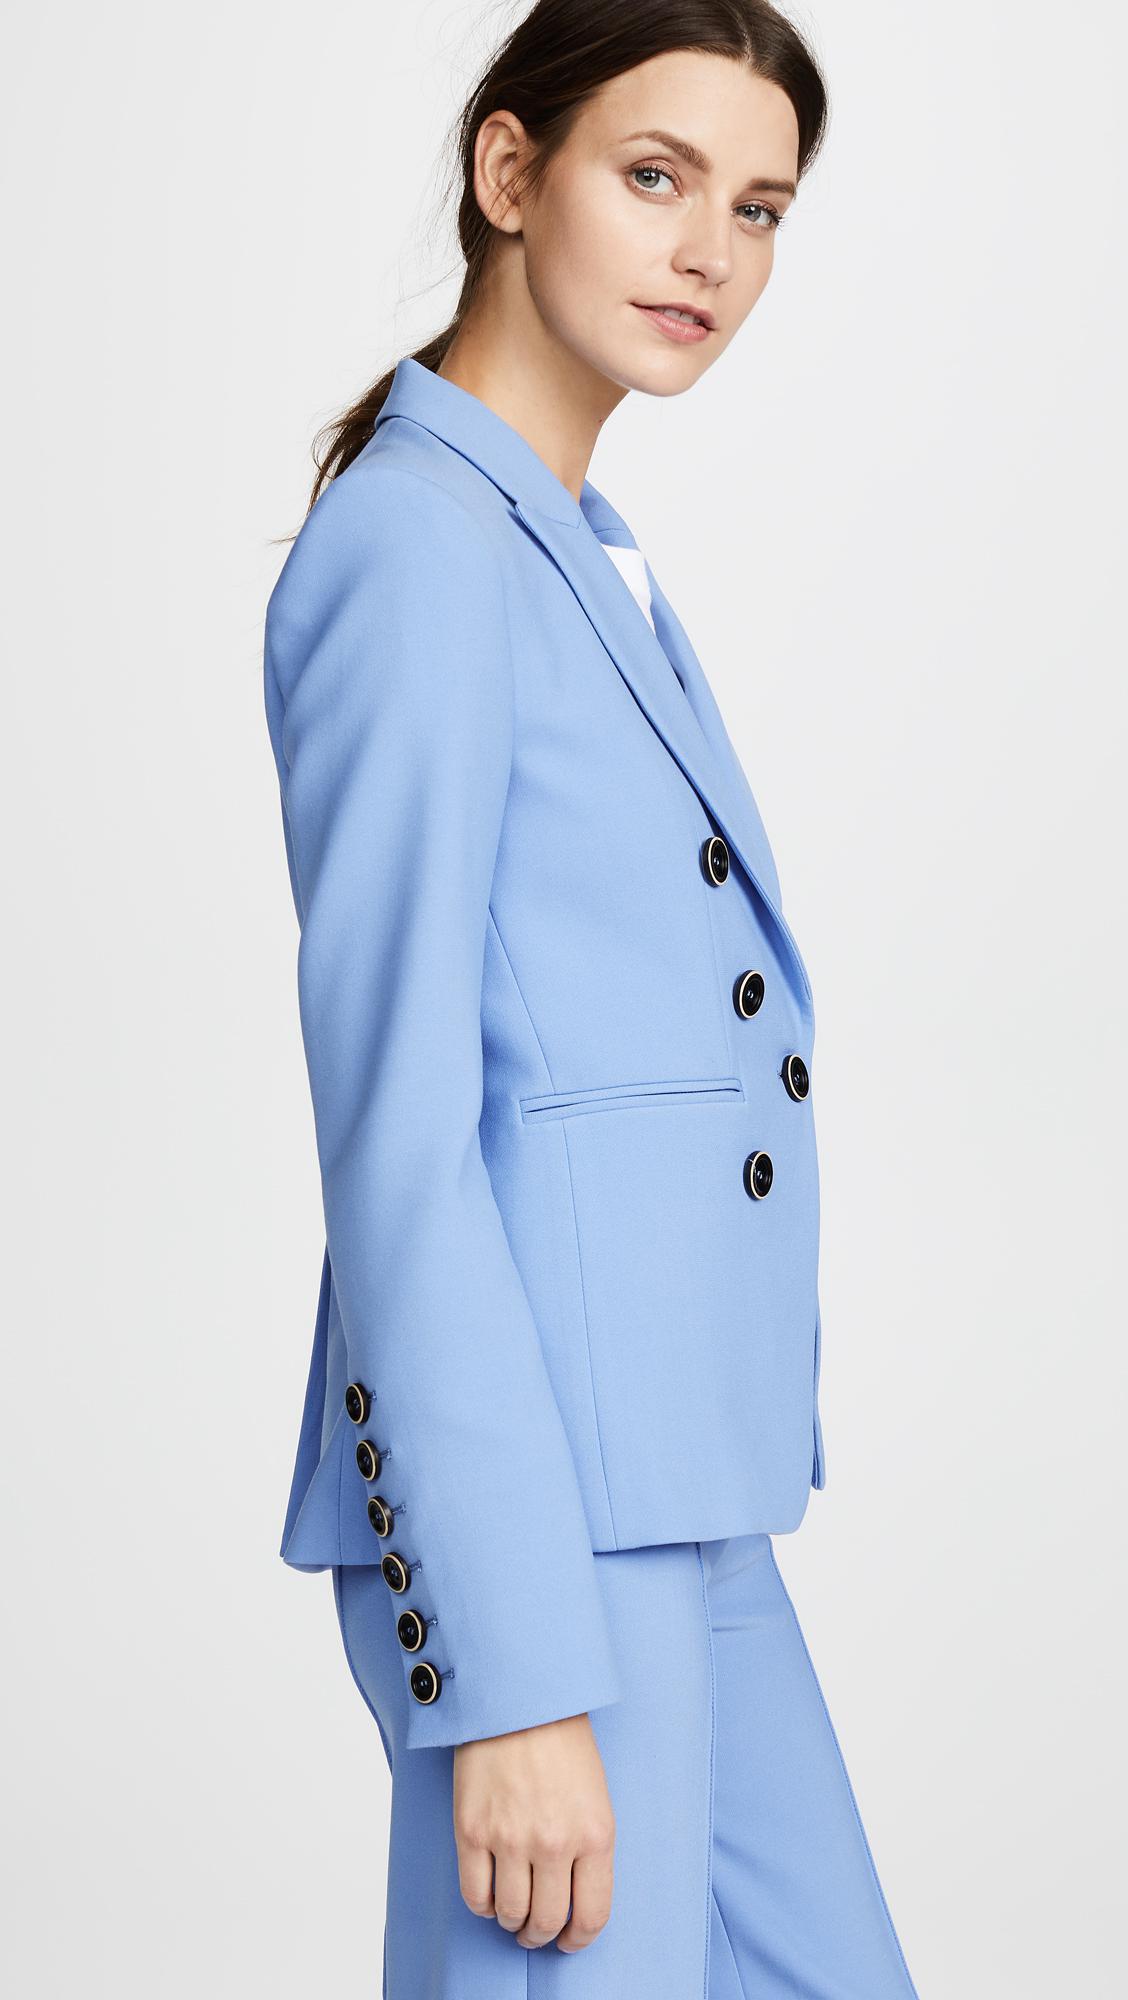 Veronica Beard Synthetic Colson Dickey Jacket in Blue - Lyst